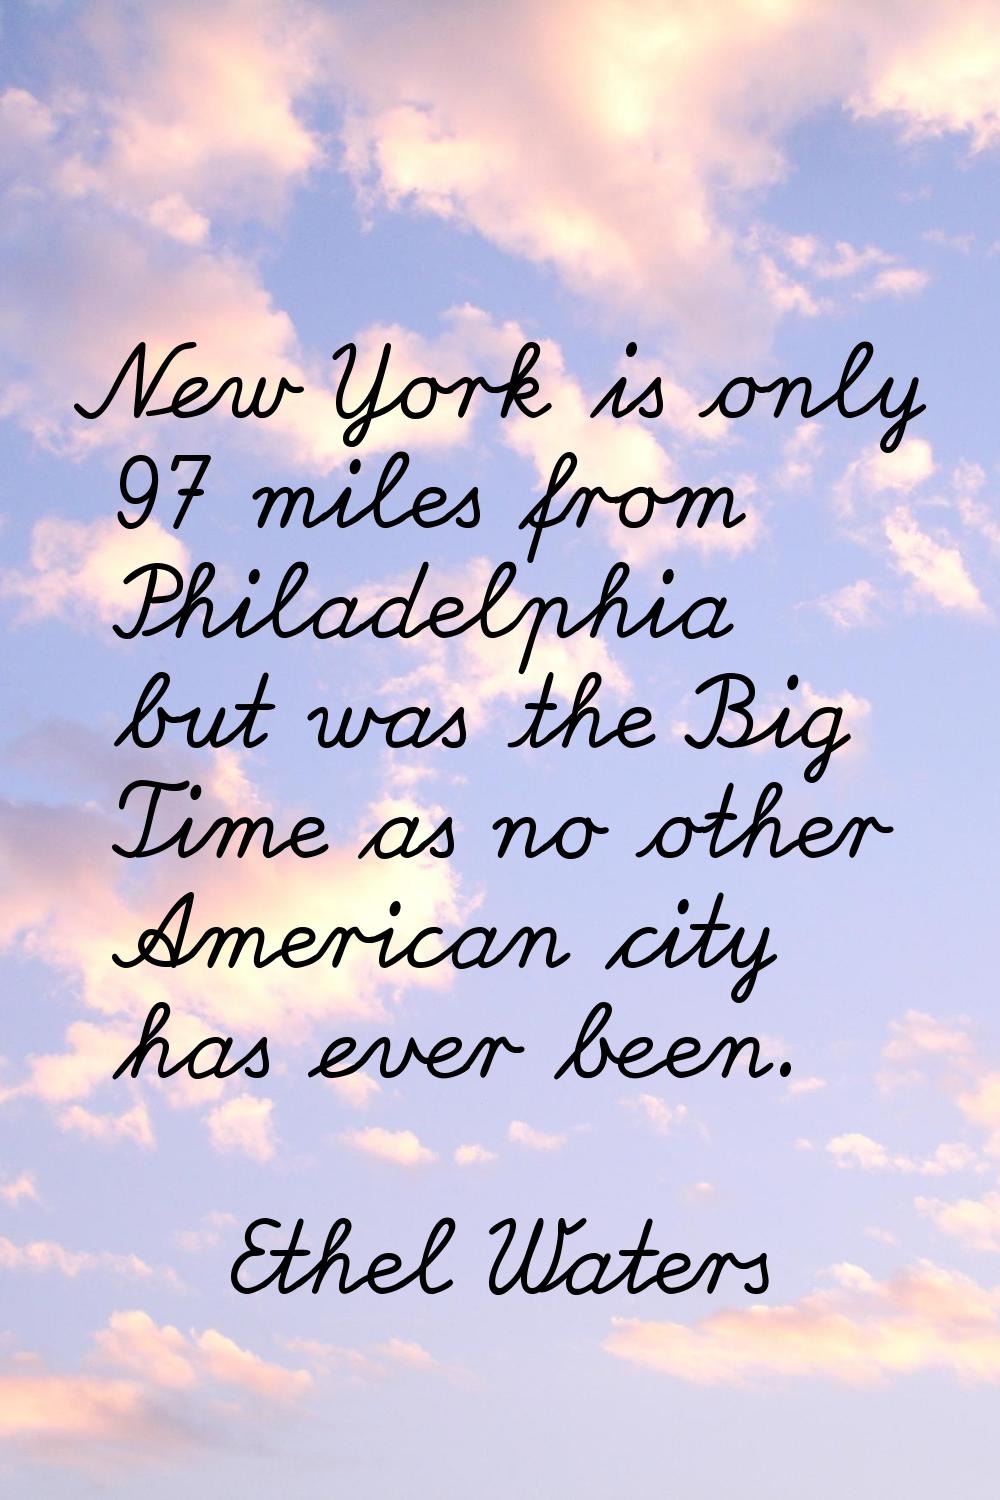 New York is only 97 miles from Philadelphia but was the Big Time as no other American city has ever